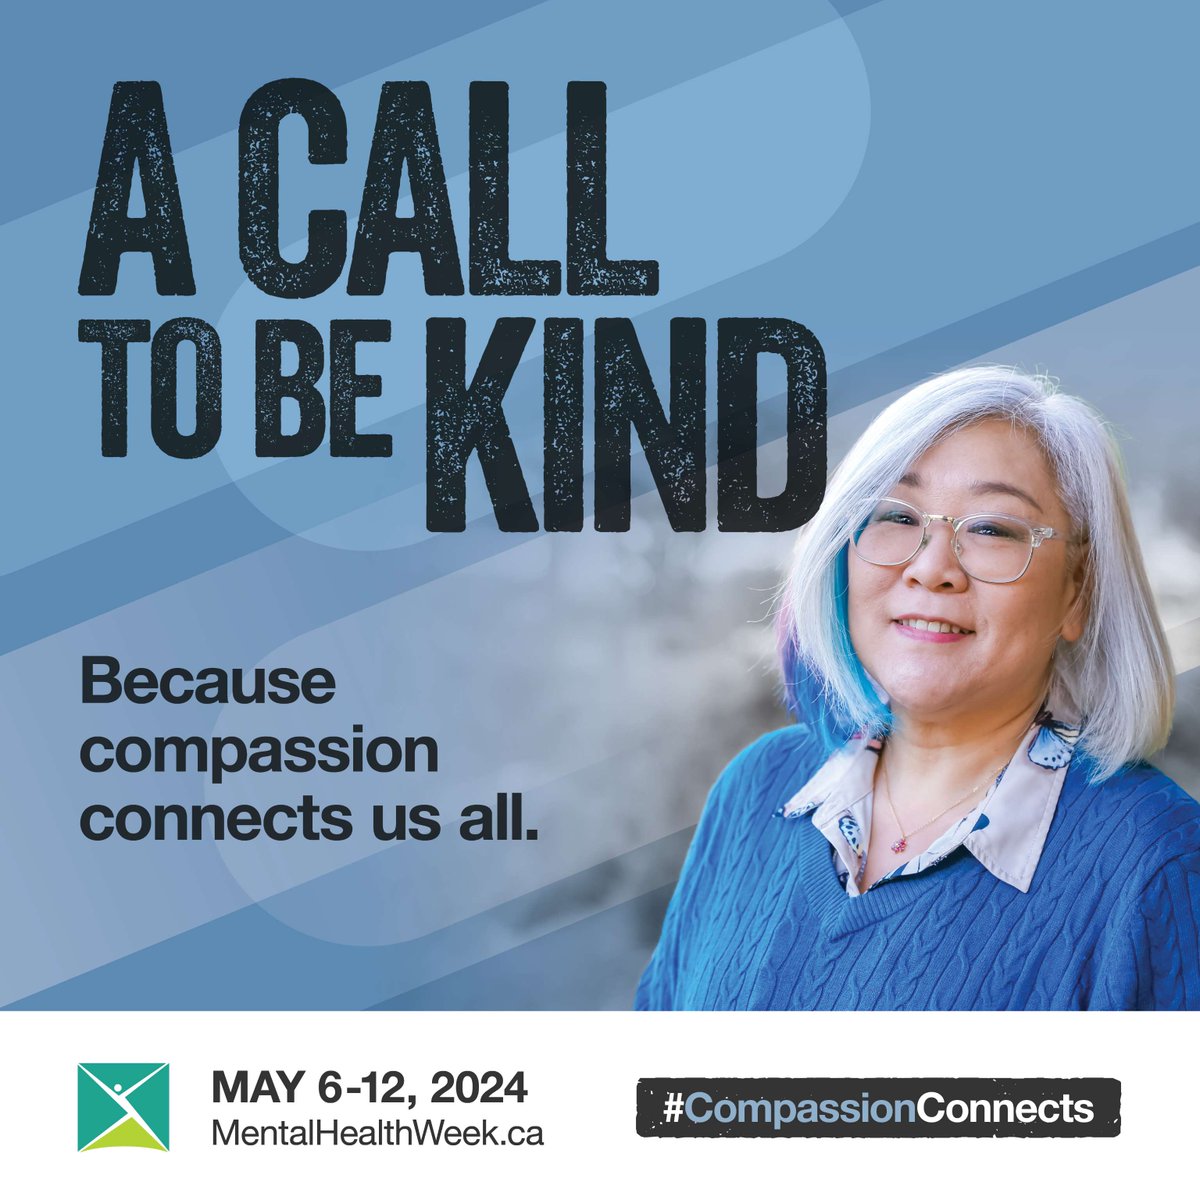 This year’s #MentalHealthWeek is all about compassion! Join the Canadian Mental Health Association (CMHA) in a conversation about how #CompassionConnects from May 6-12. Download your toolkit today at ow.ly/H1ju50RxgmR @CMHA_NTL